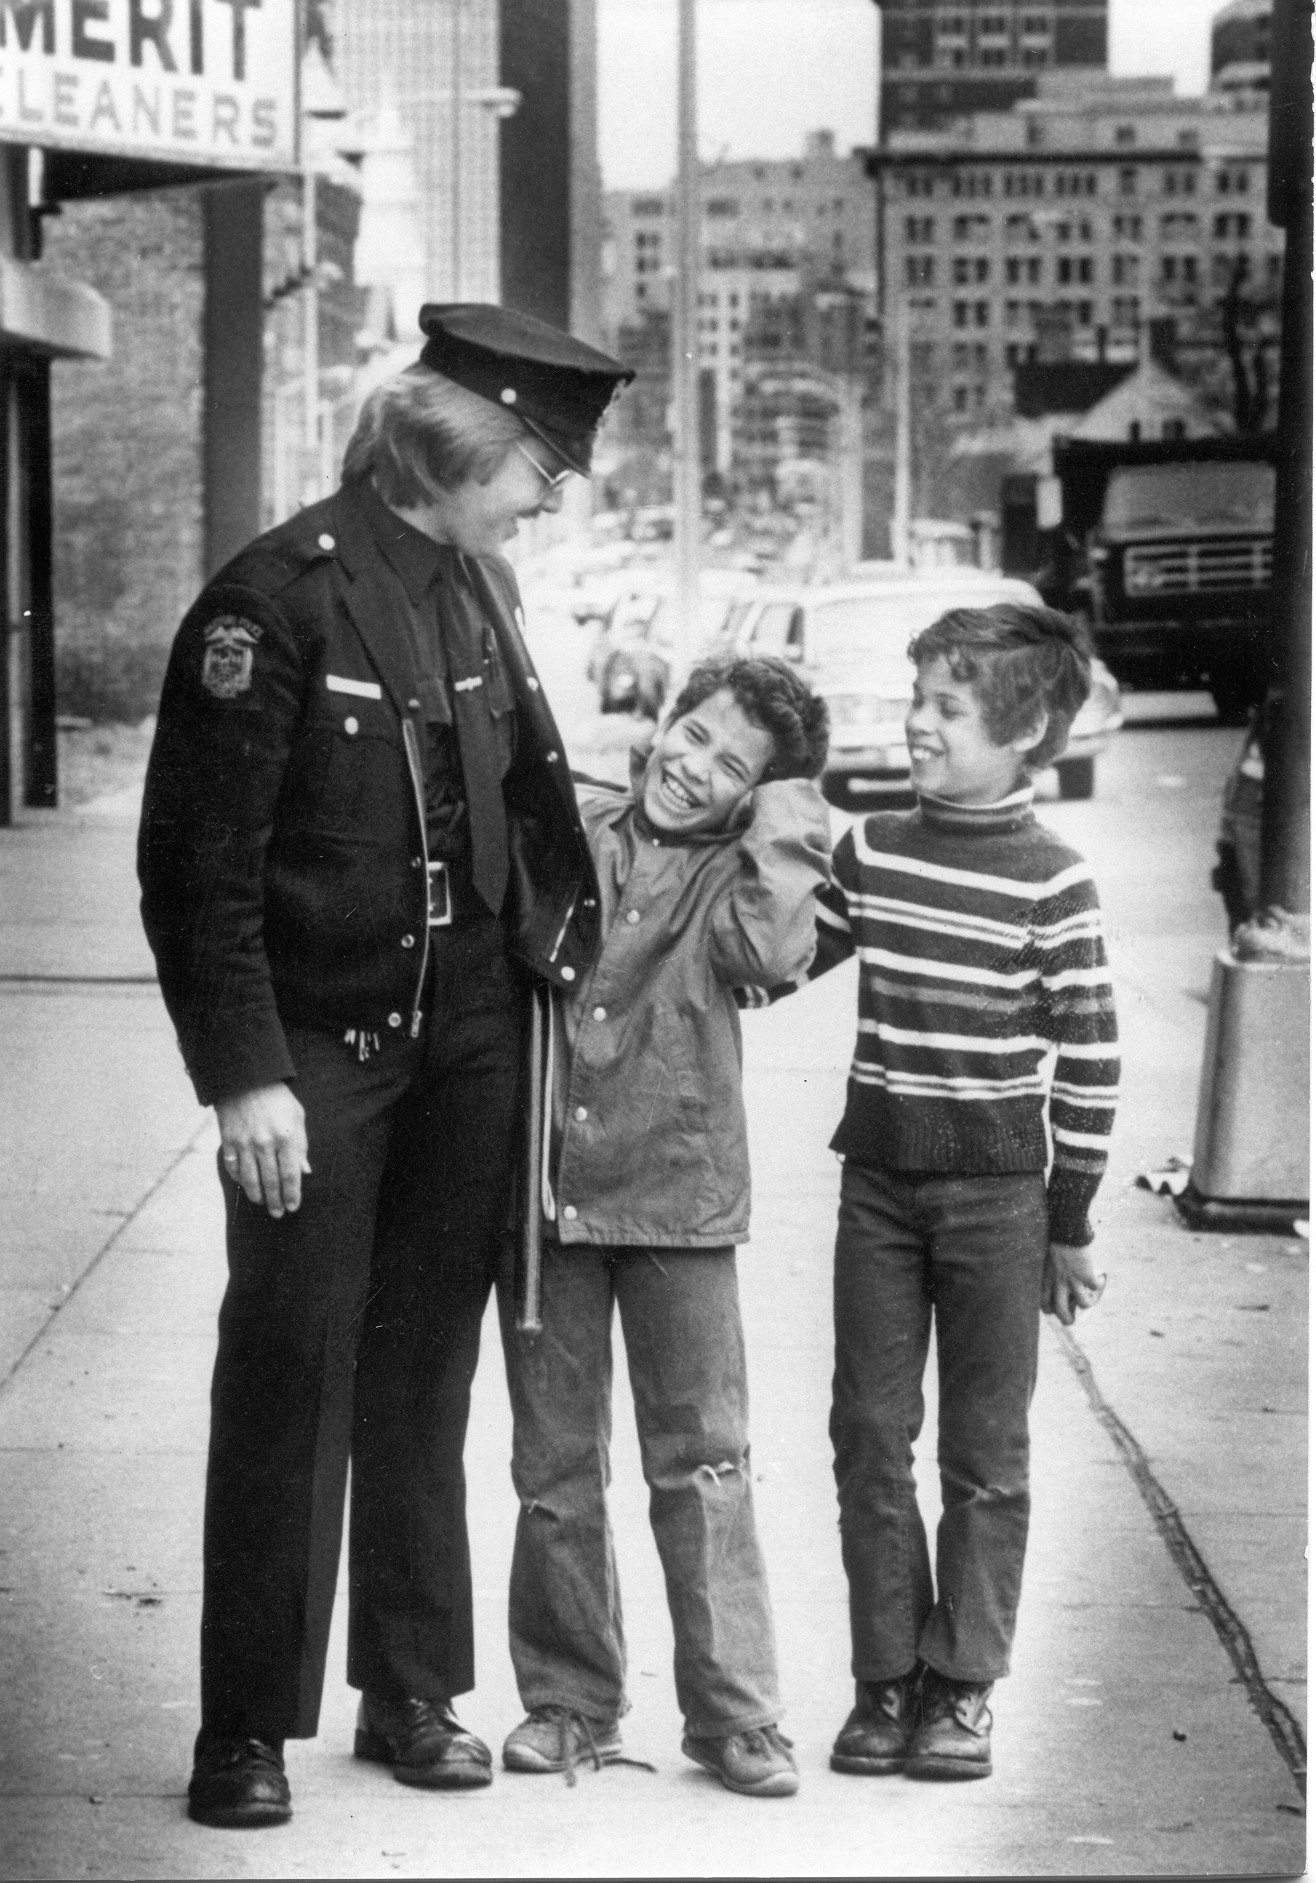 Officer with kids